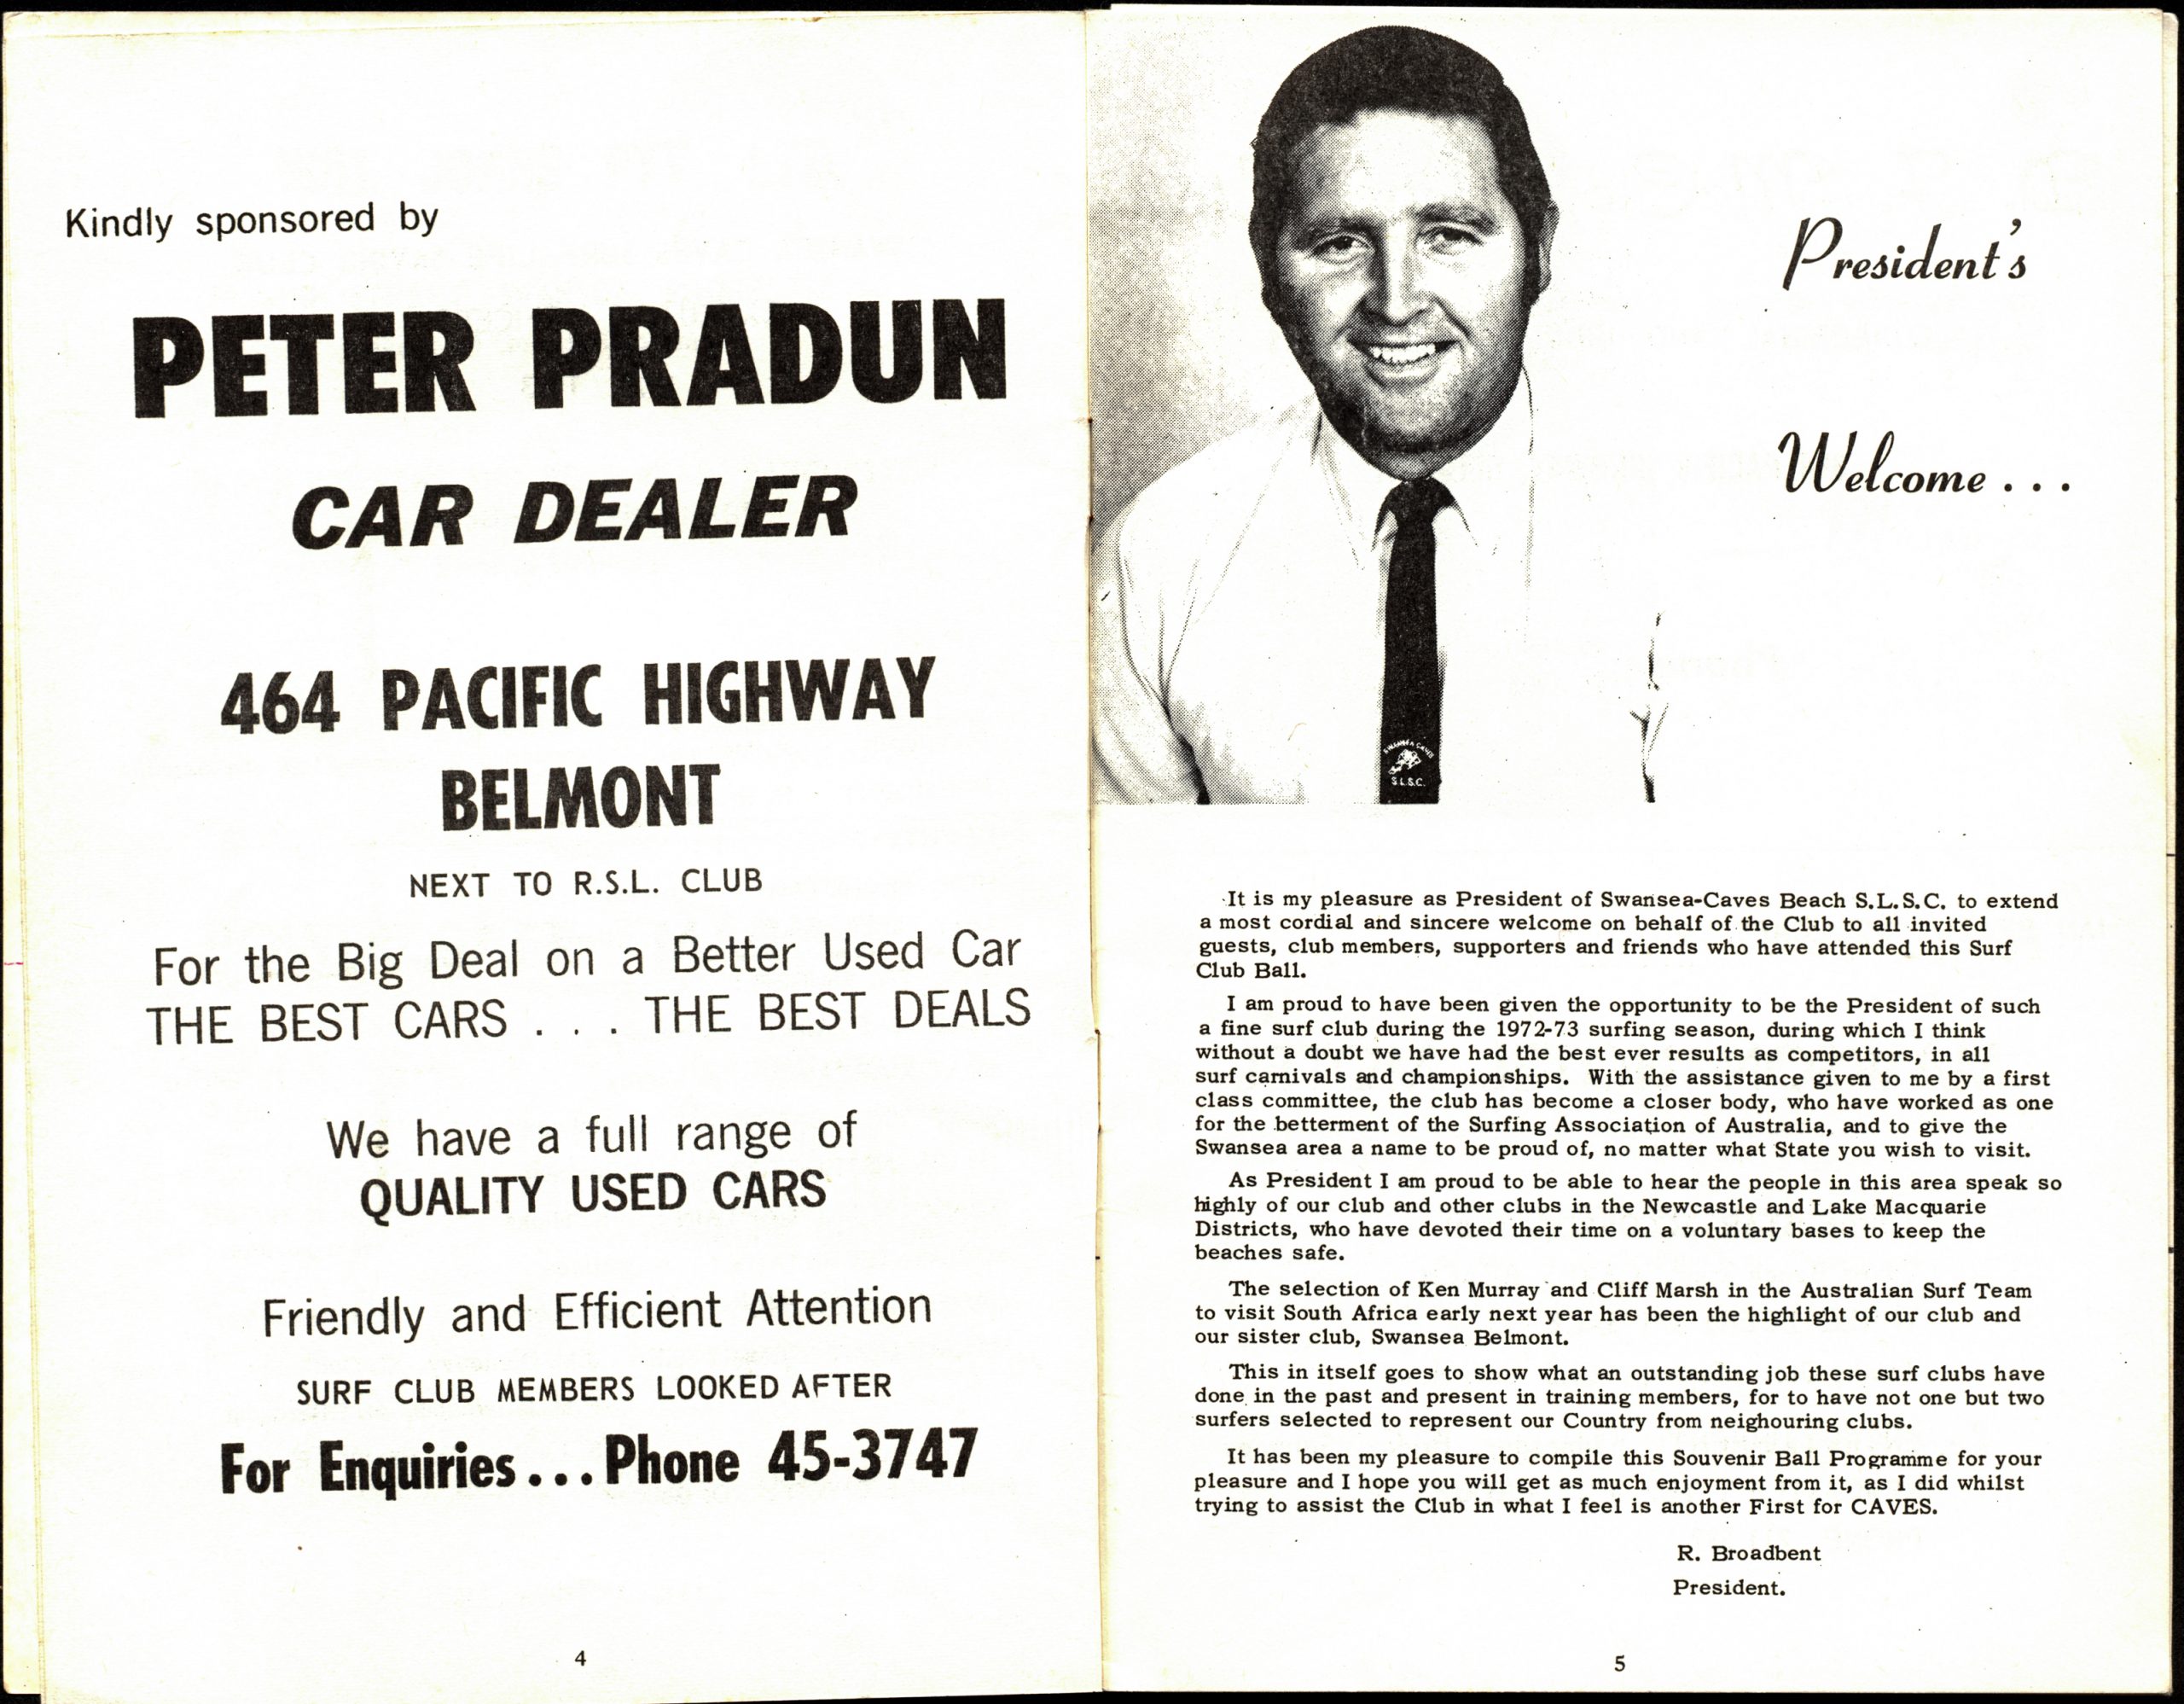 Programme pages with local advertisements followed by a black and white photograph of the club president, R. Broadbent, smiling in a shirt and tie alongside a welcome message to those attending the Surf Club Ball,